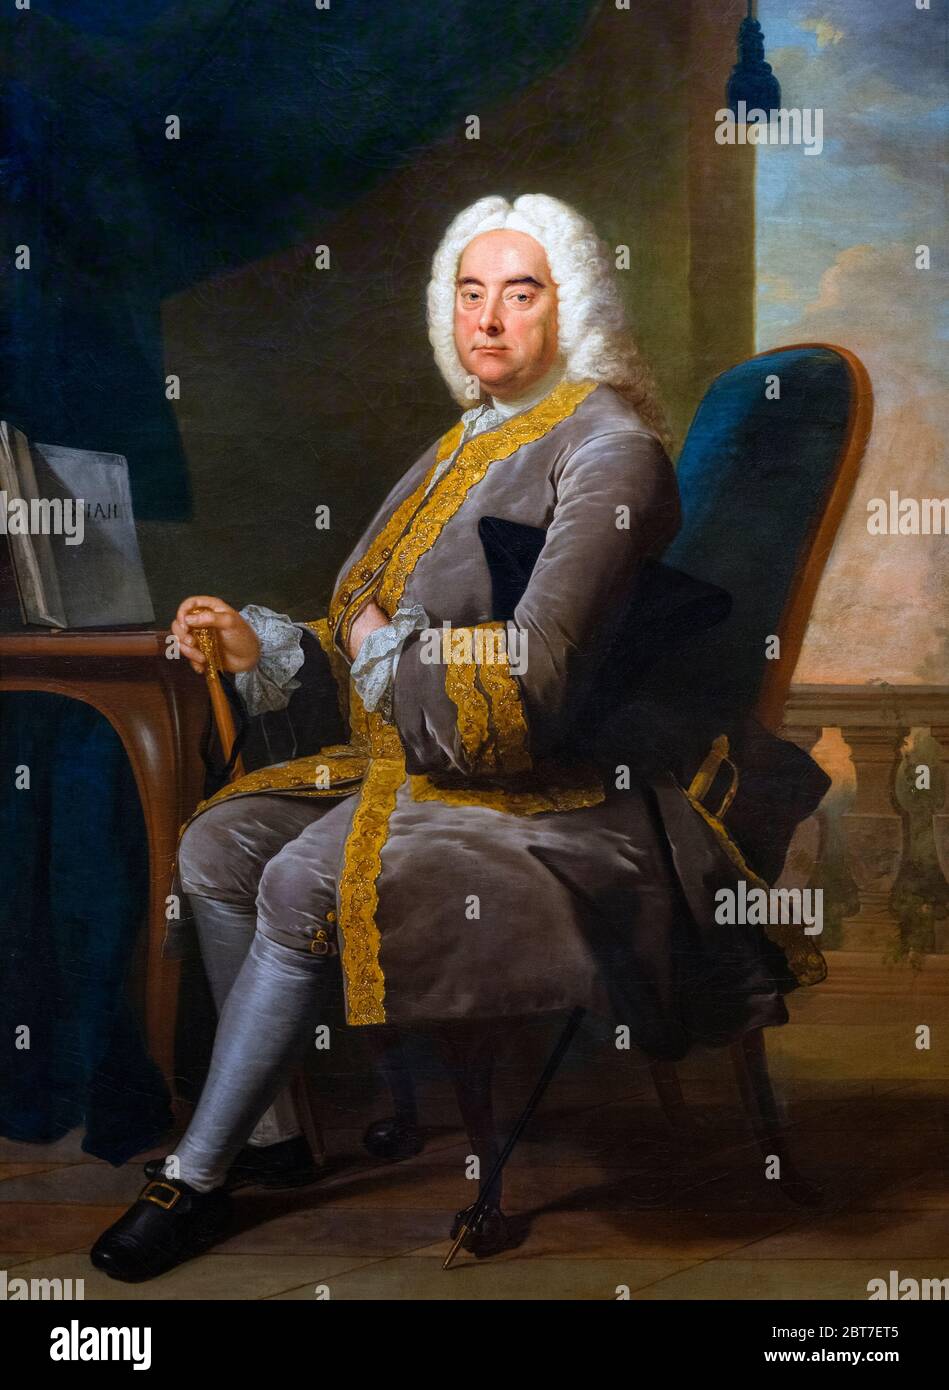 George Frideric (or Frederick) Handel (1685-1759), portrait by Thomas Hudson, oil on canvas, 1756. Stock Photo